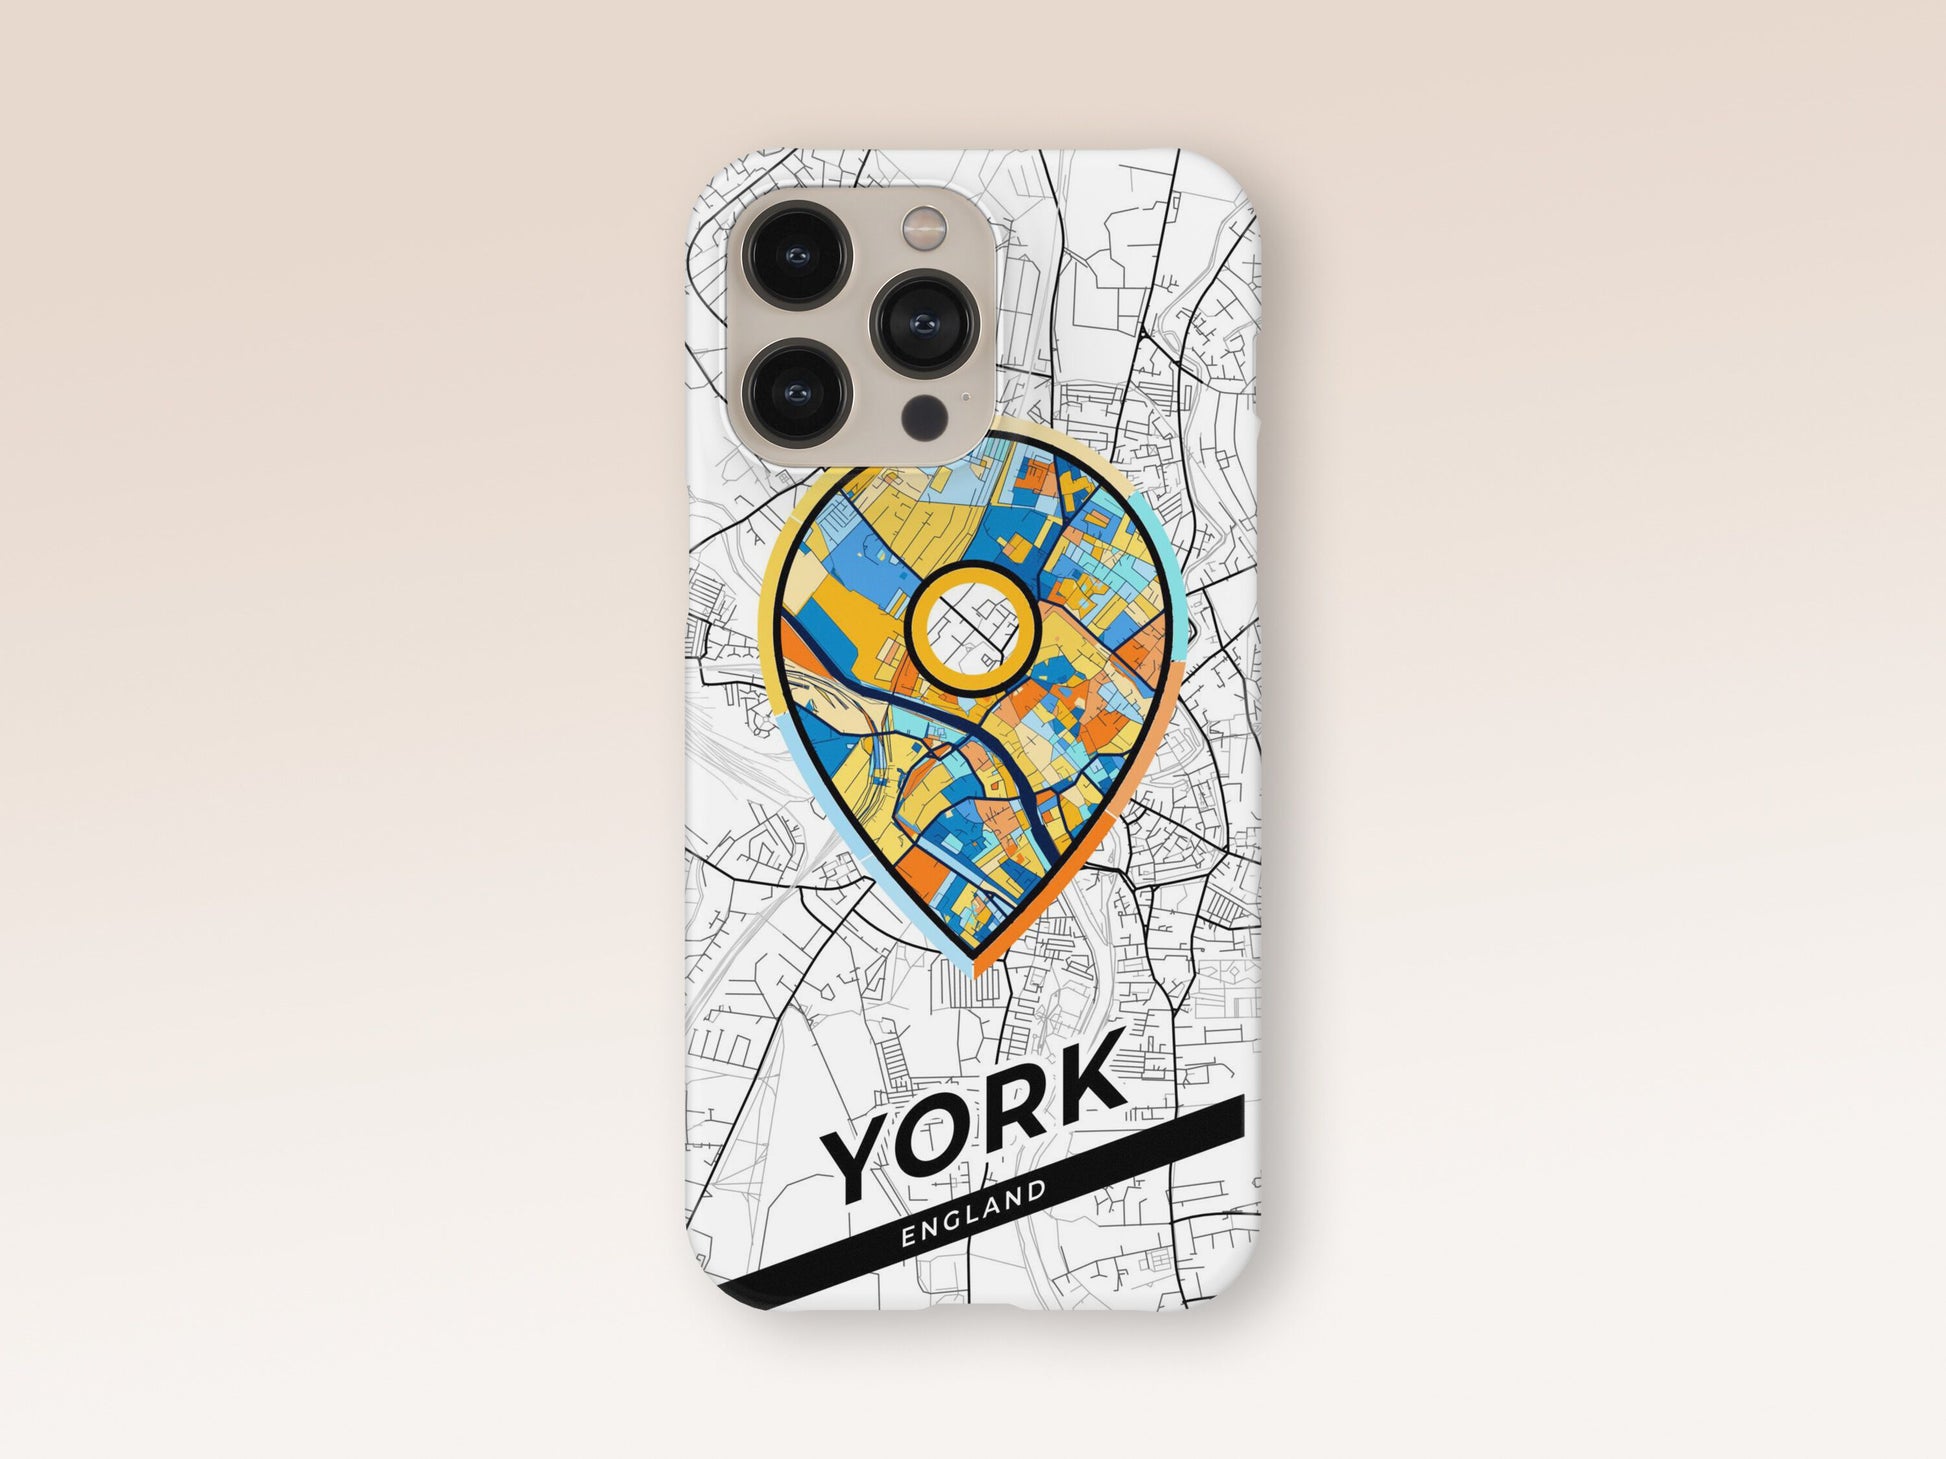 York England slim phone case with colorful icon 1